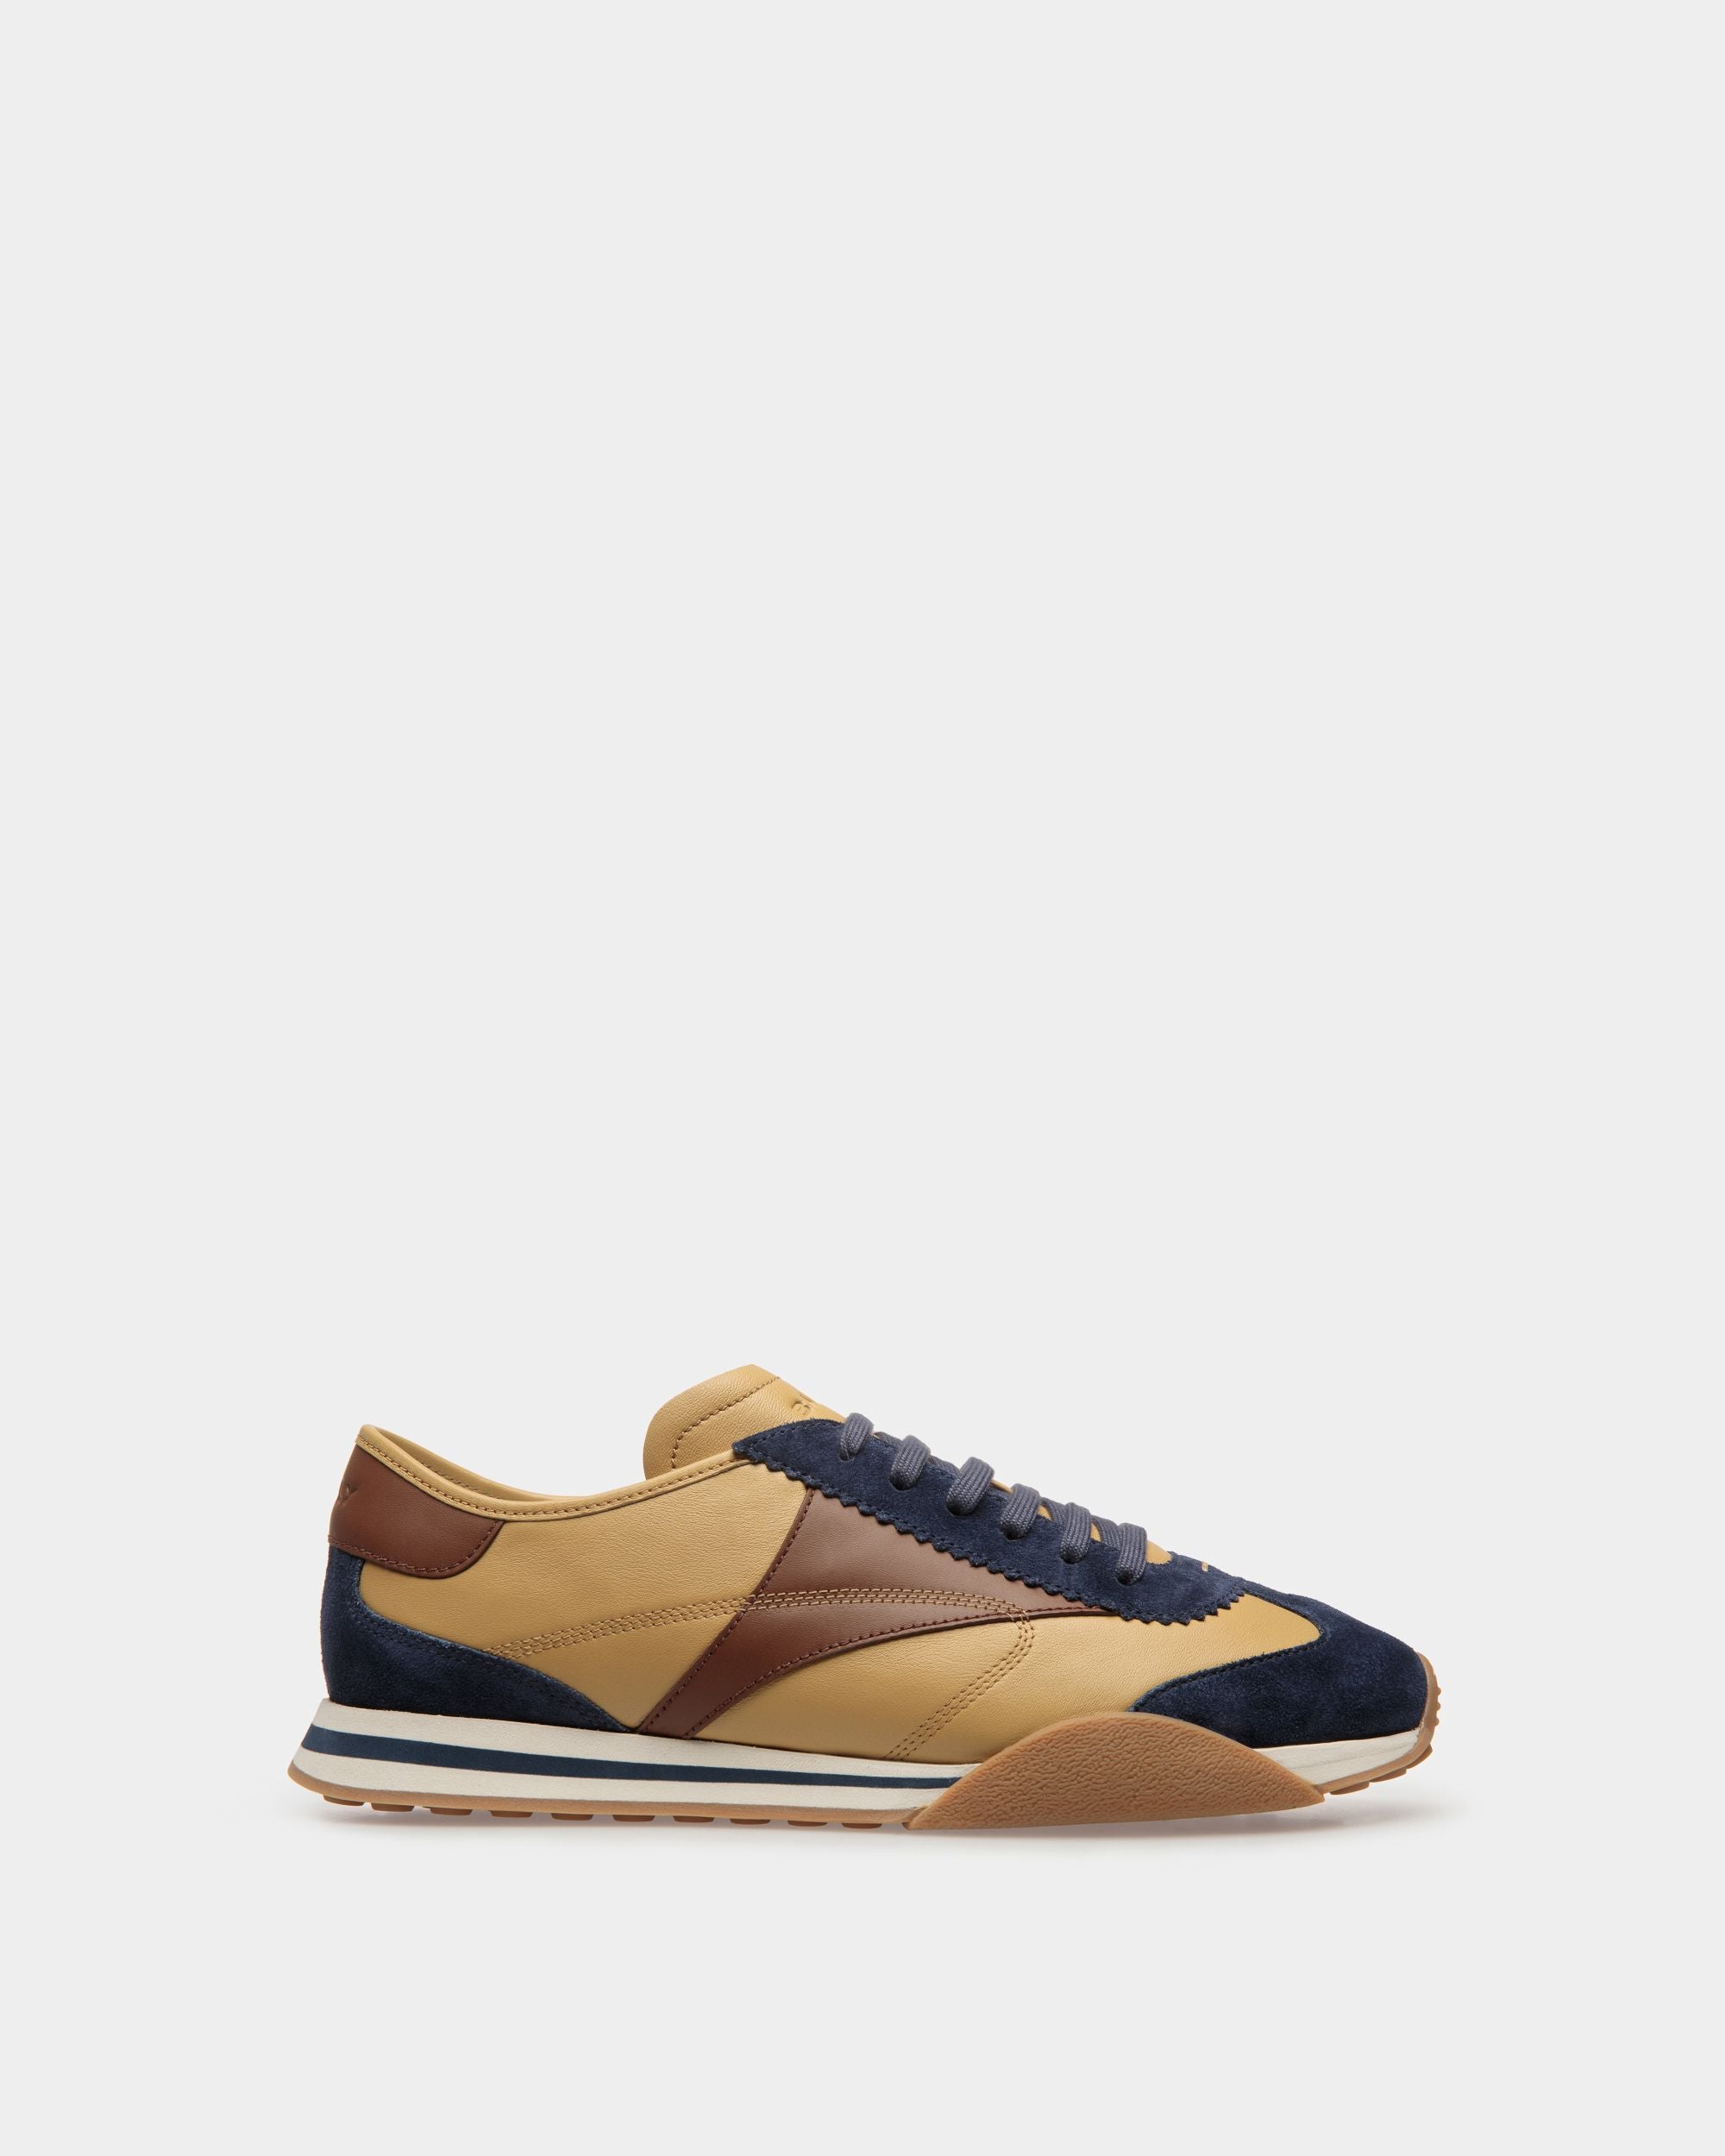 Sonney | Men's Sneakers | Marine And Brown Leather | Bally | Still Life Side